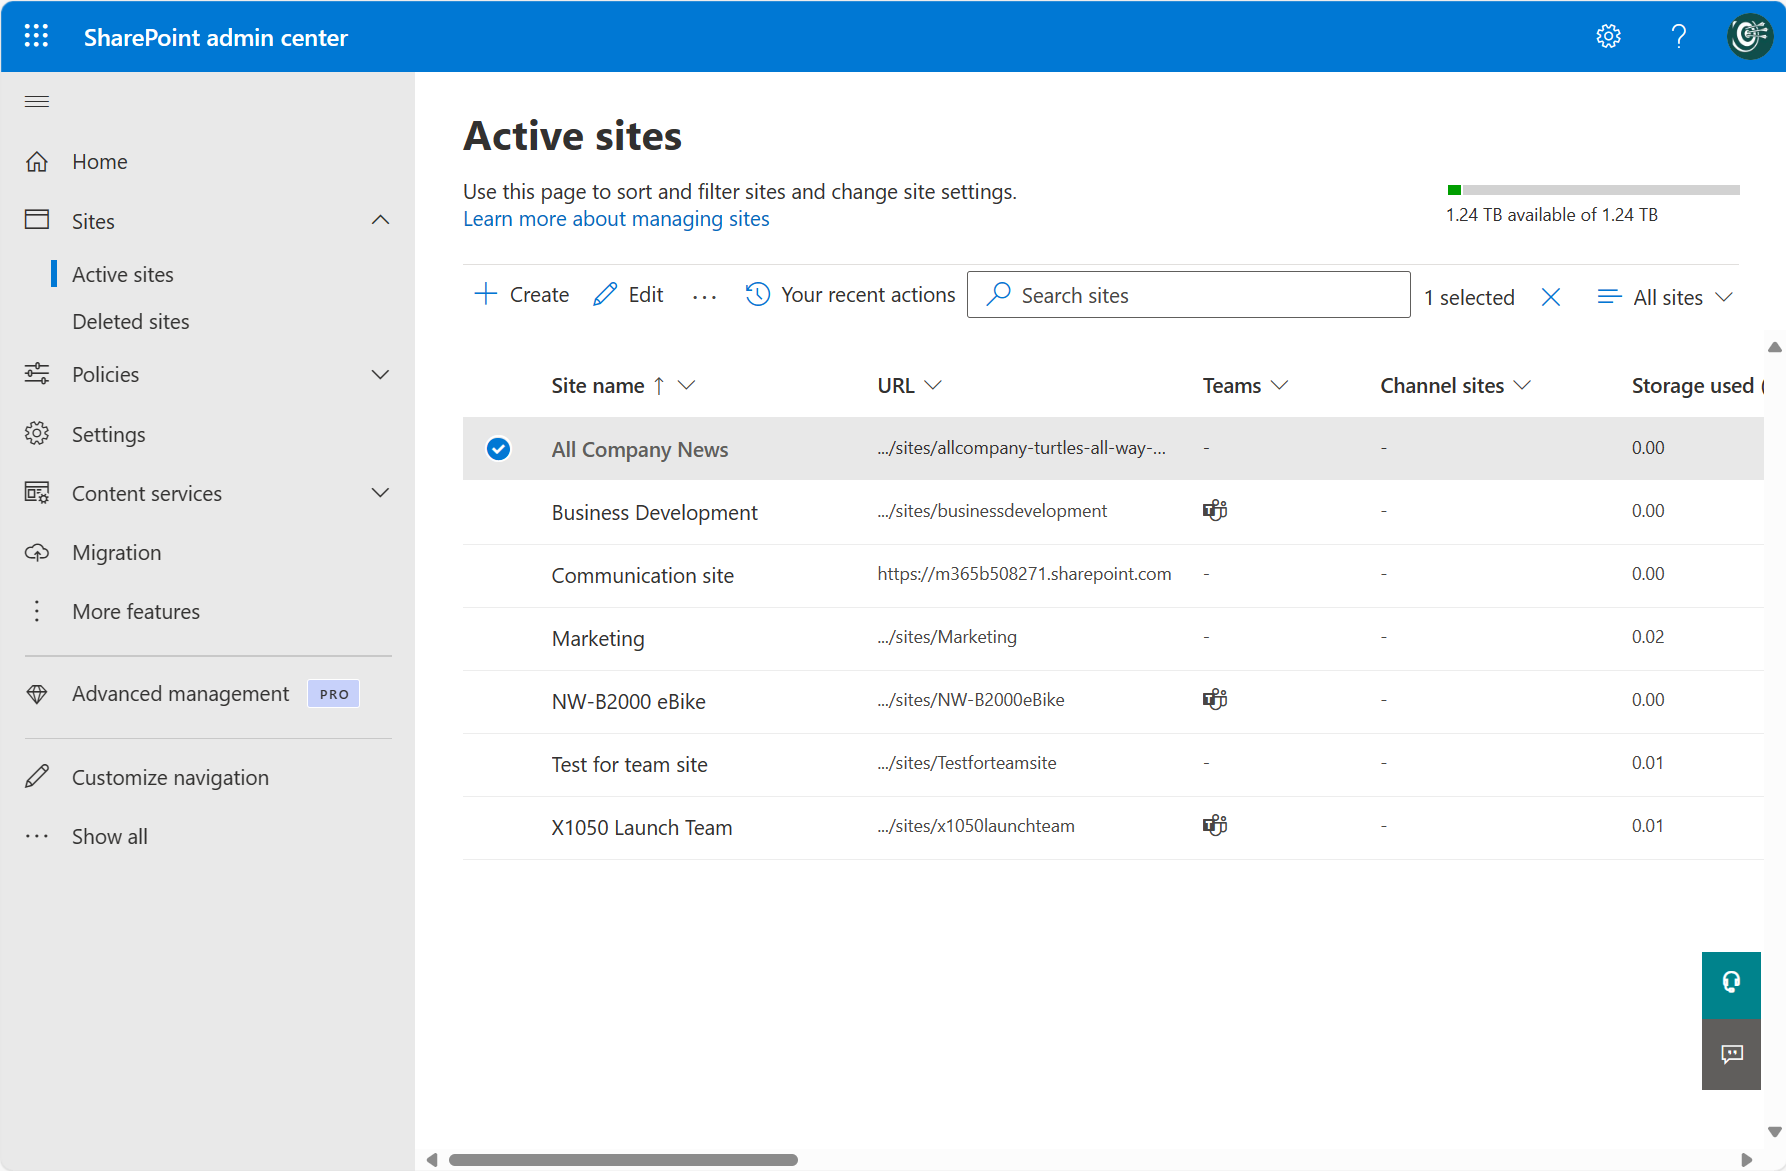 Manage sites in the SharePoint admin center - SharePoint in Microsoft 365